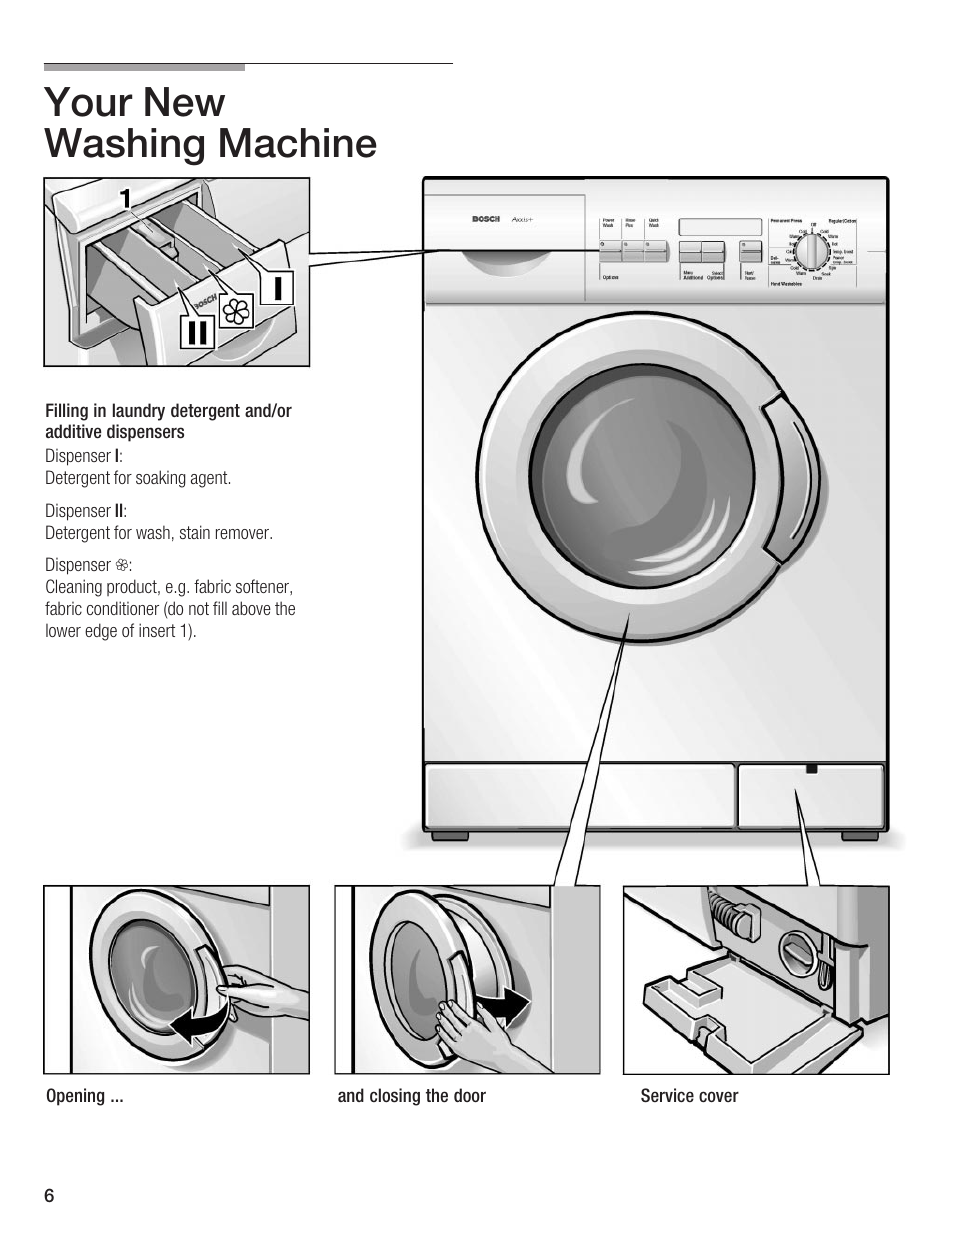 Your New Washing Machine Bosch Axxis Wfr 2460 User Manual